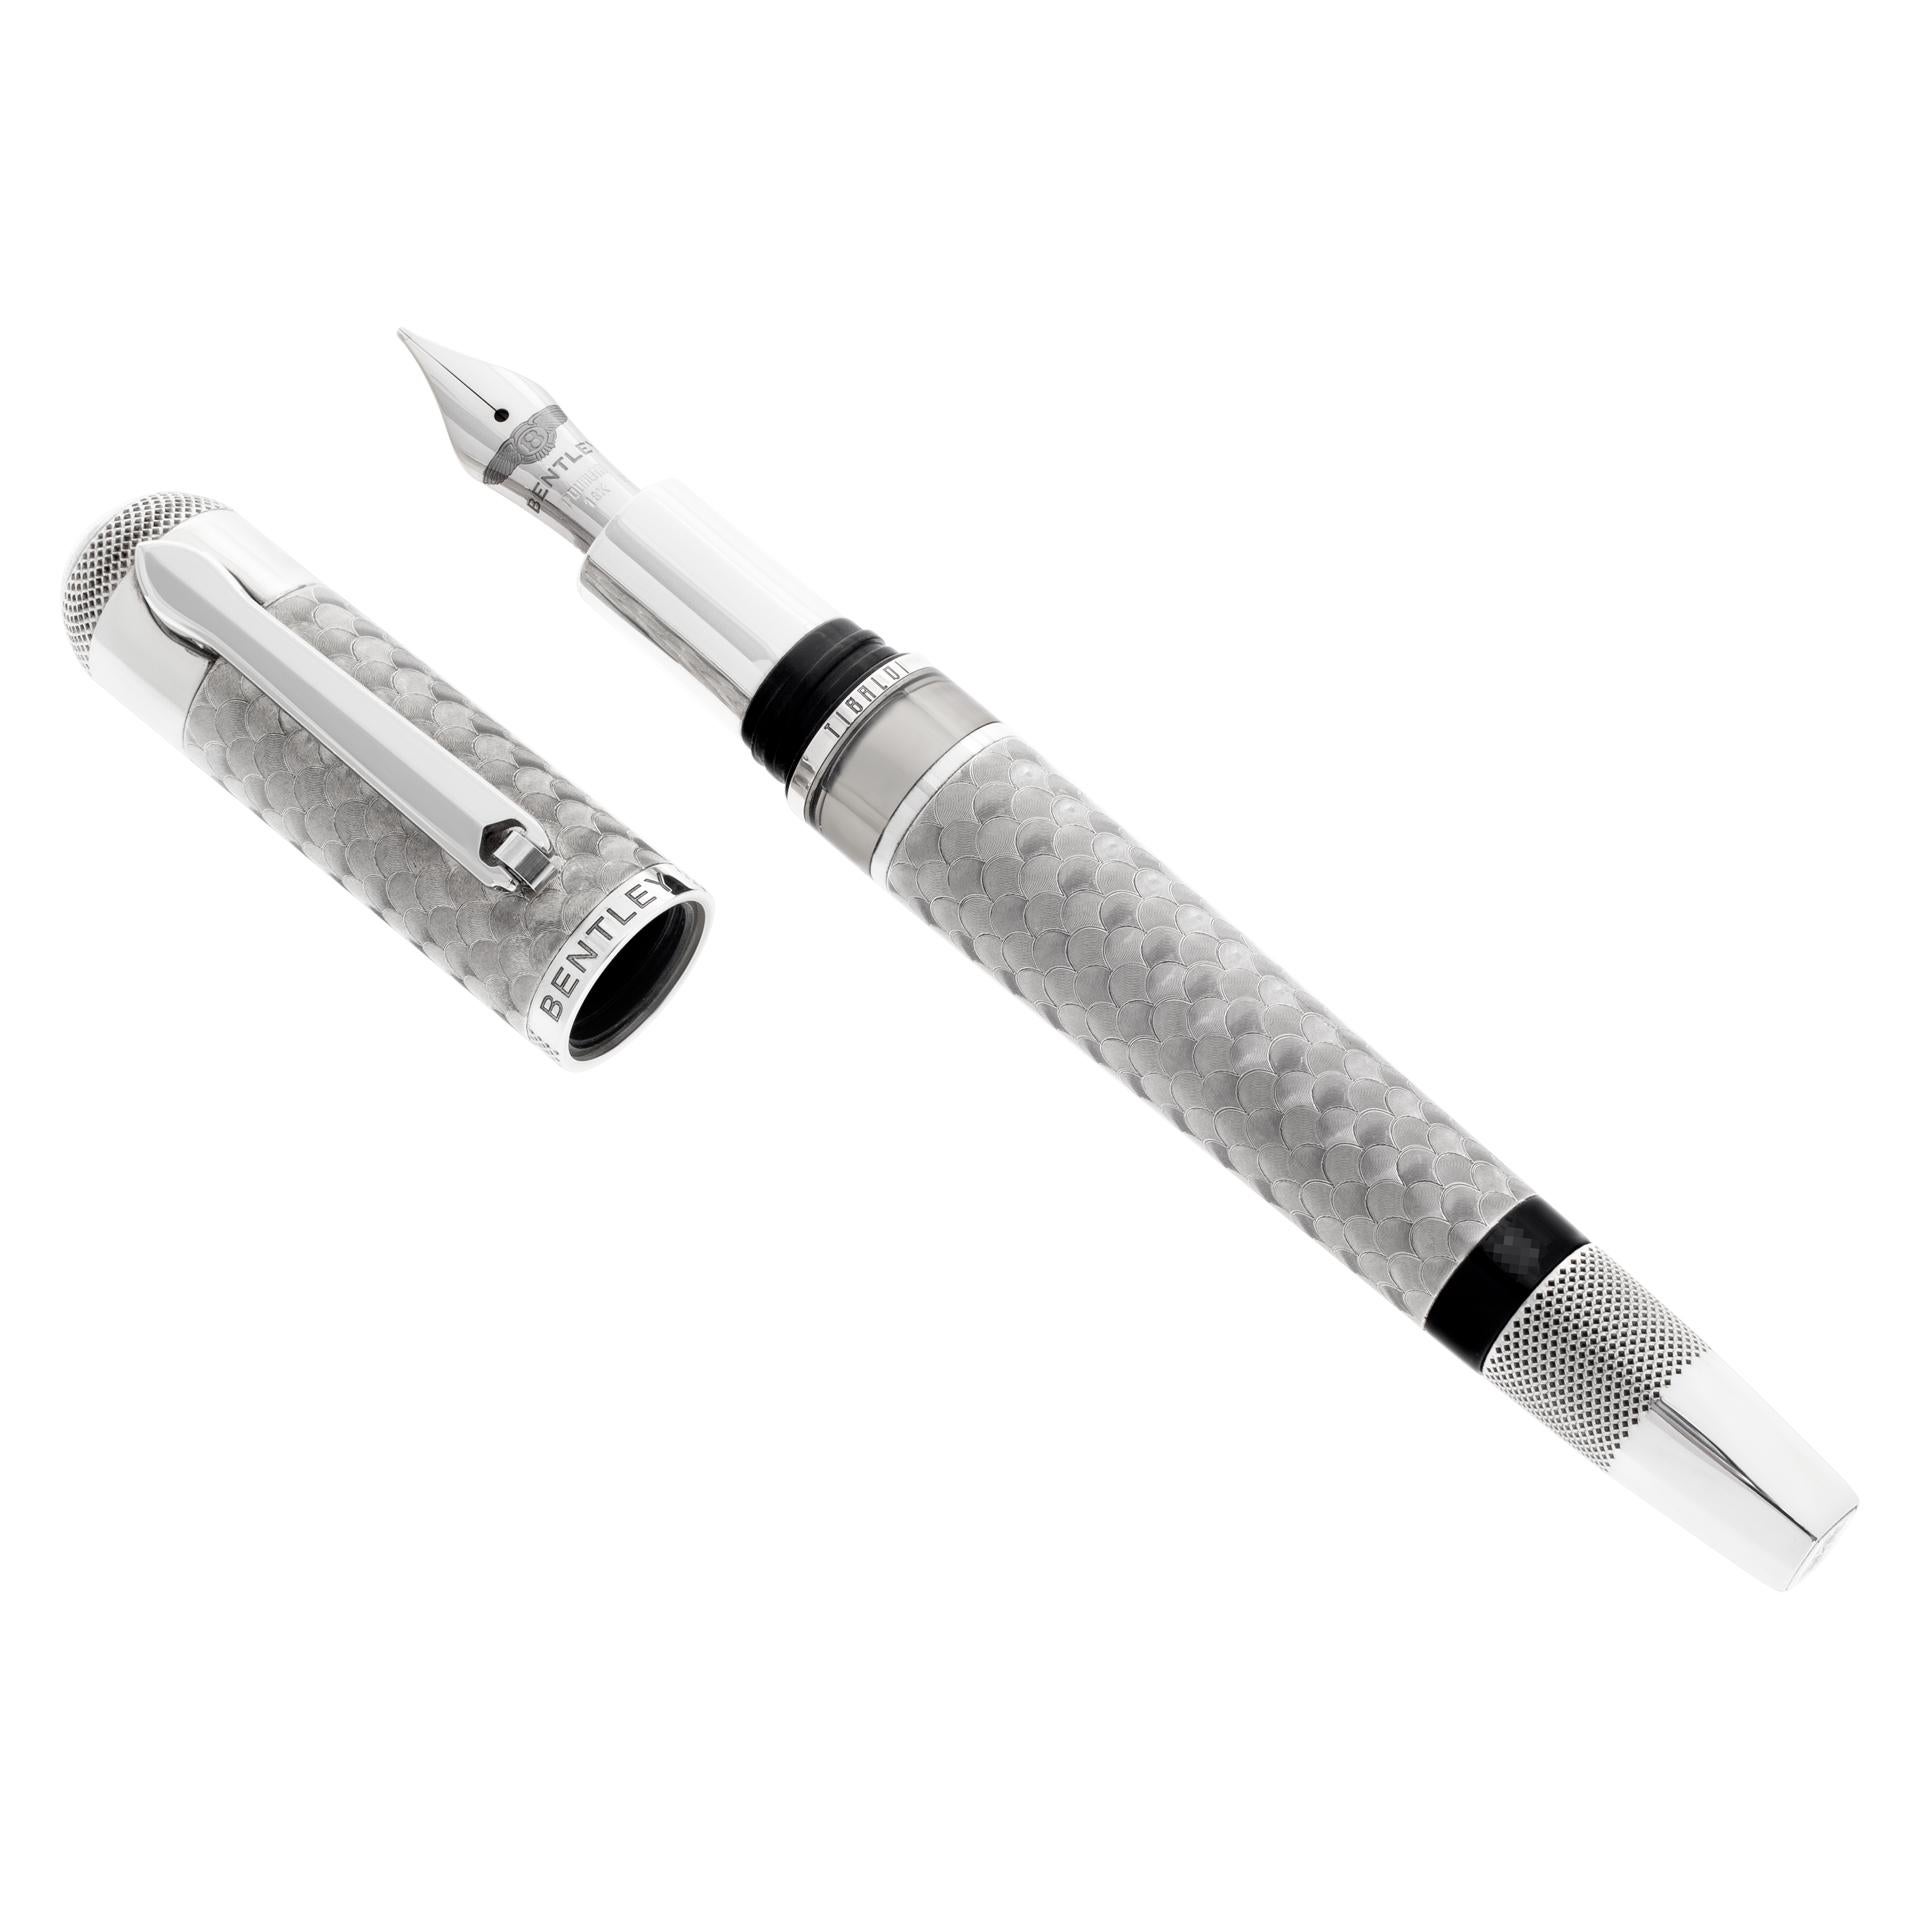 Tibaldi Montegrappa for Bentley 60th Anniversary Crewe Collection sterling silver fountain pen. 18k white gold nib. Limited Edition pen commemorating 60 years of Bentley Motors historic Crewe factory. Limted to 400 numbered pieces. Unused and